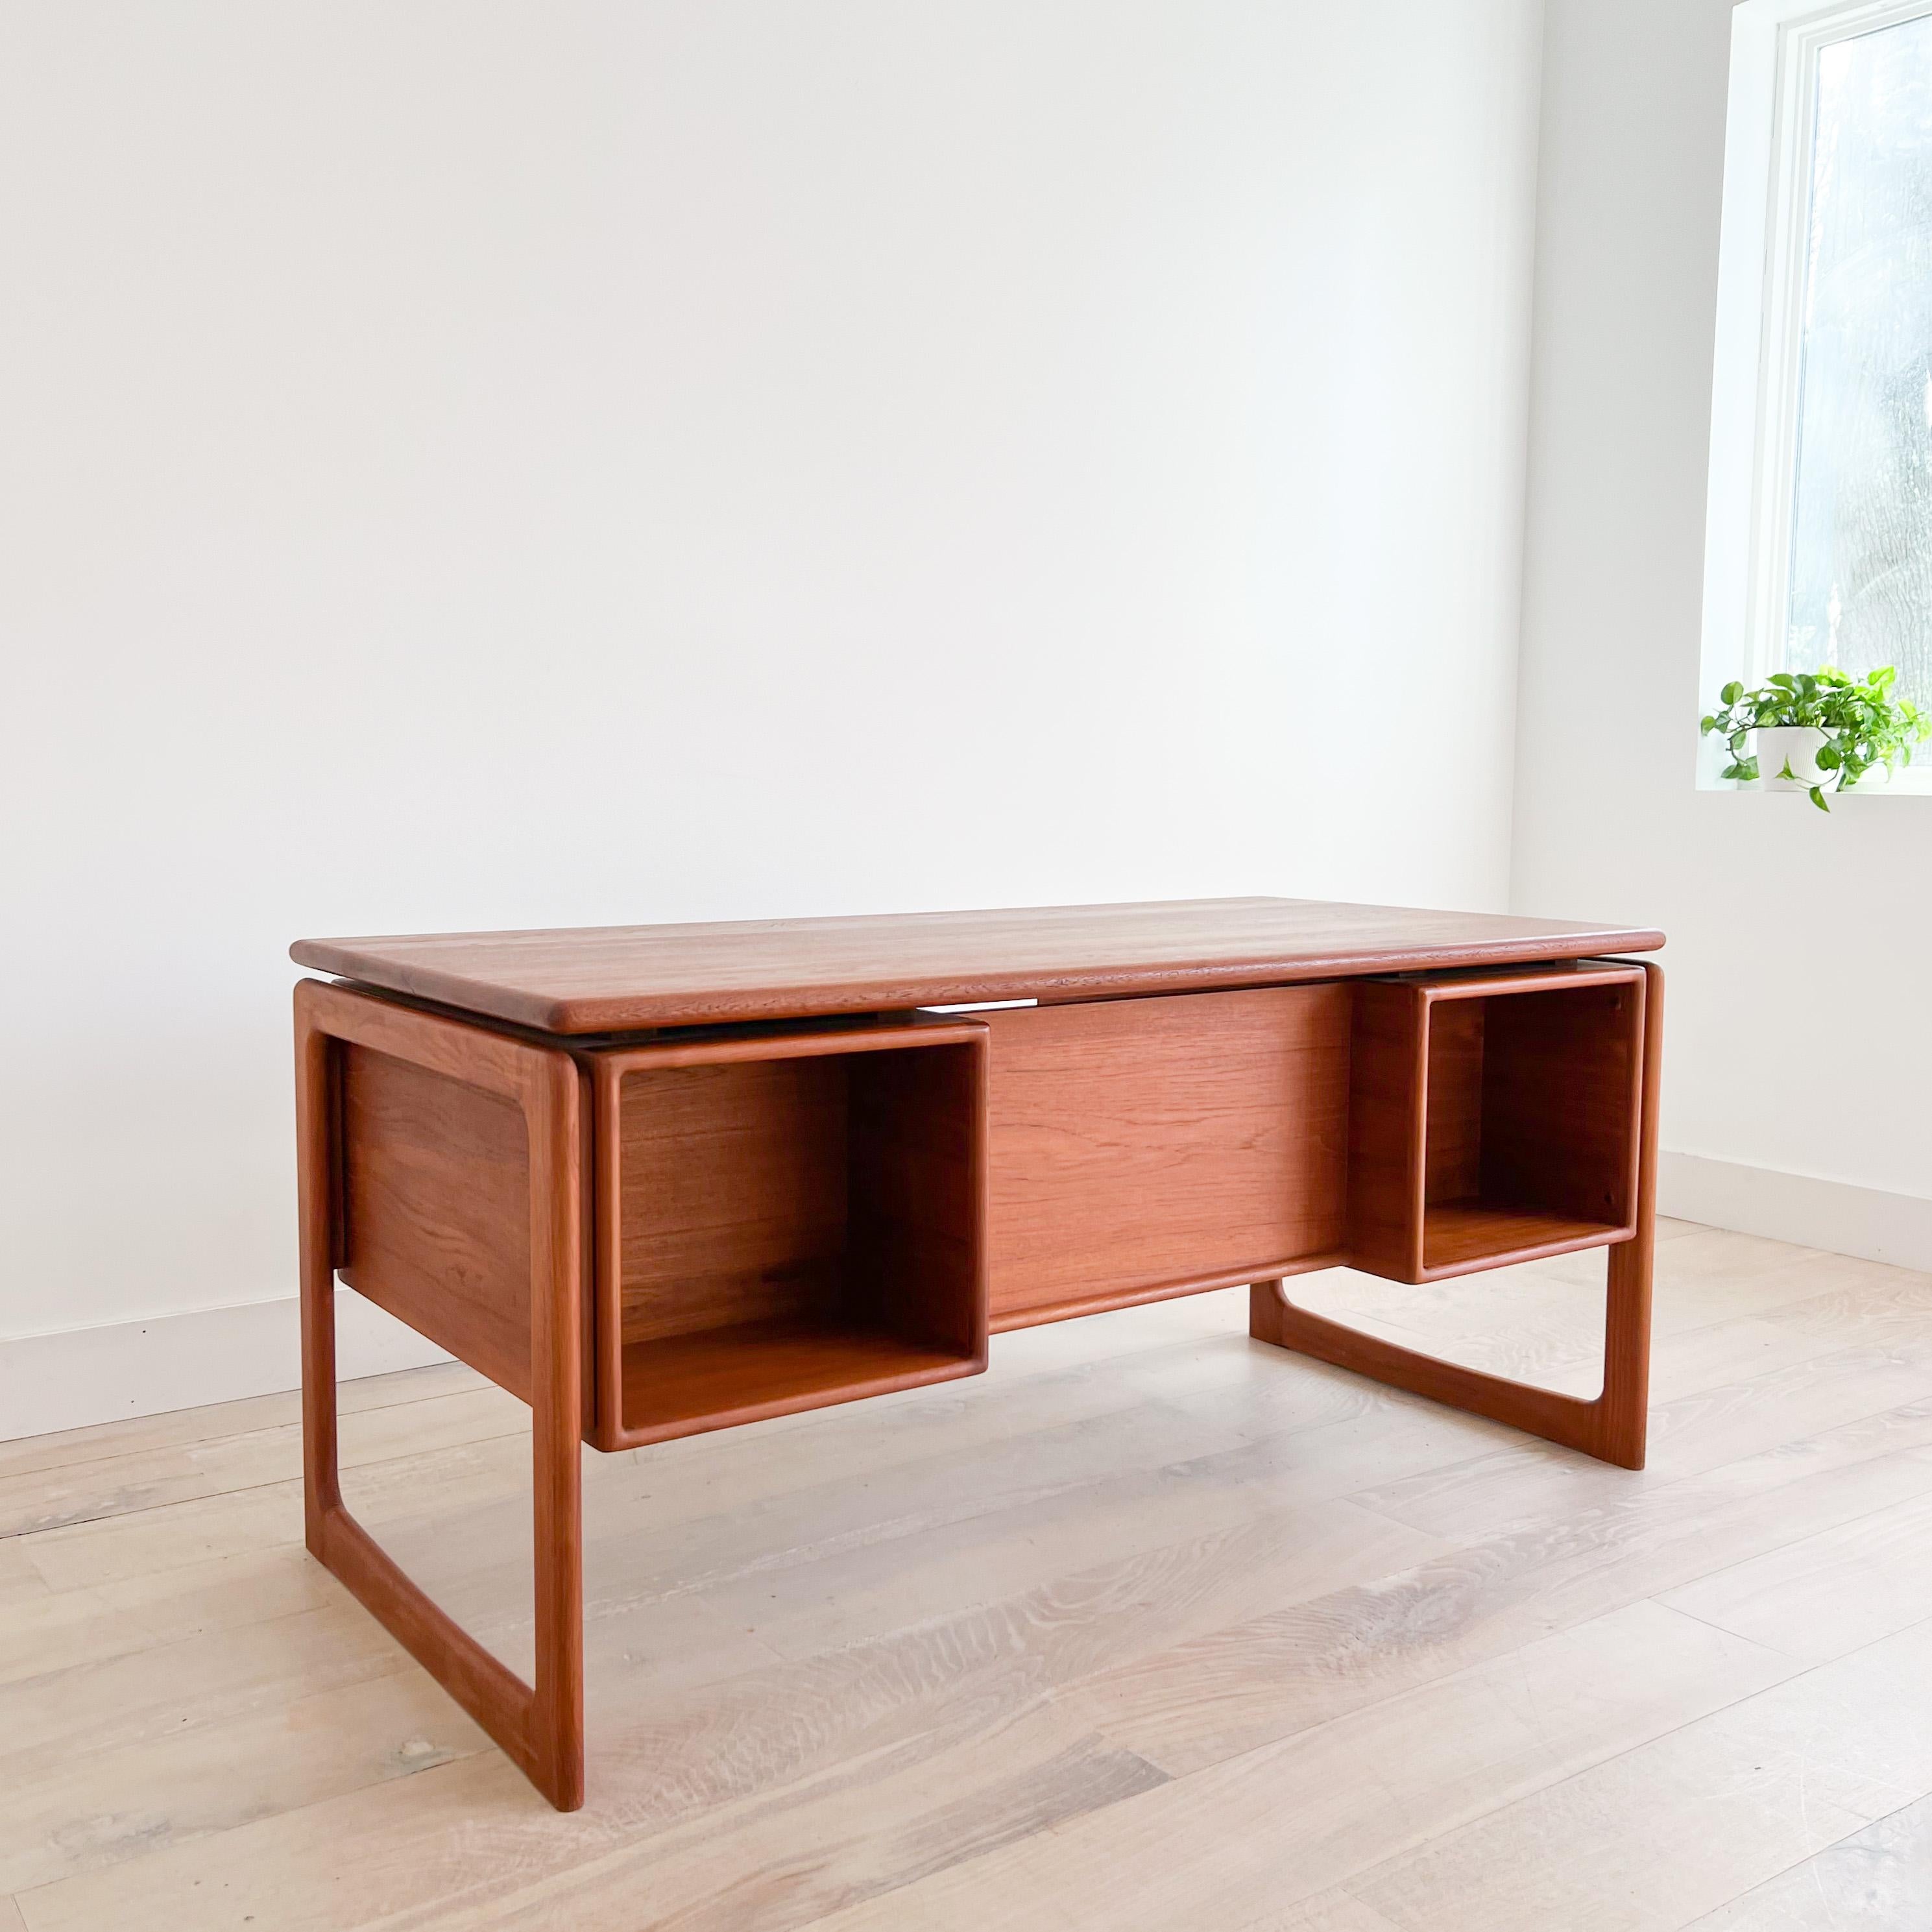 Mid-Century Modern danish teak executive desk with finished back. Open cabinets on the backside for storage or display. The top has been sanded and restored. Some scuffing/scratching from age appropriate wear. The drawers open and close with ease.